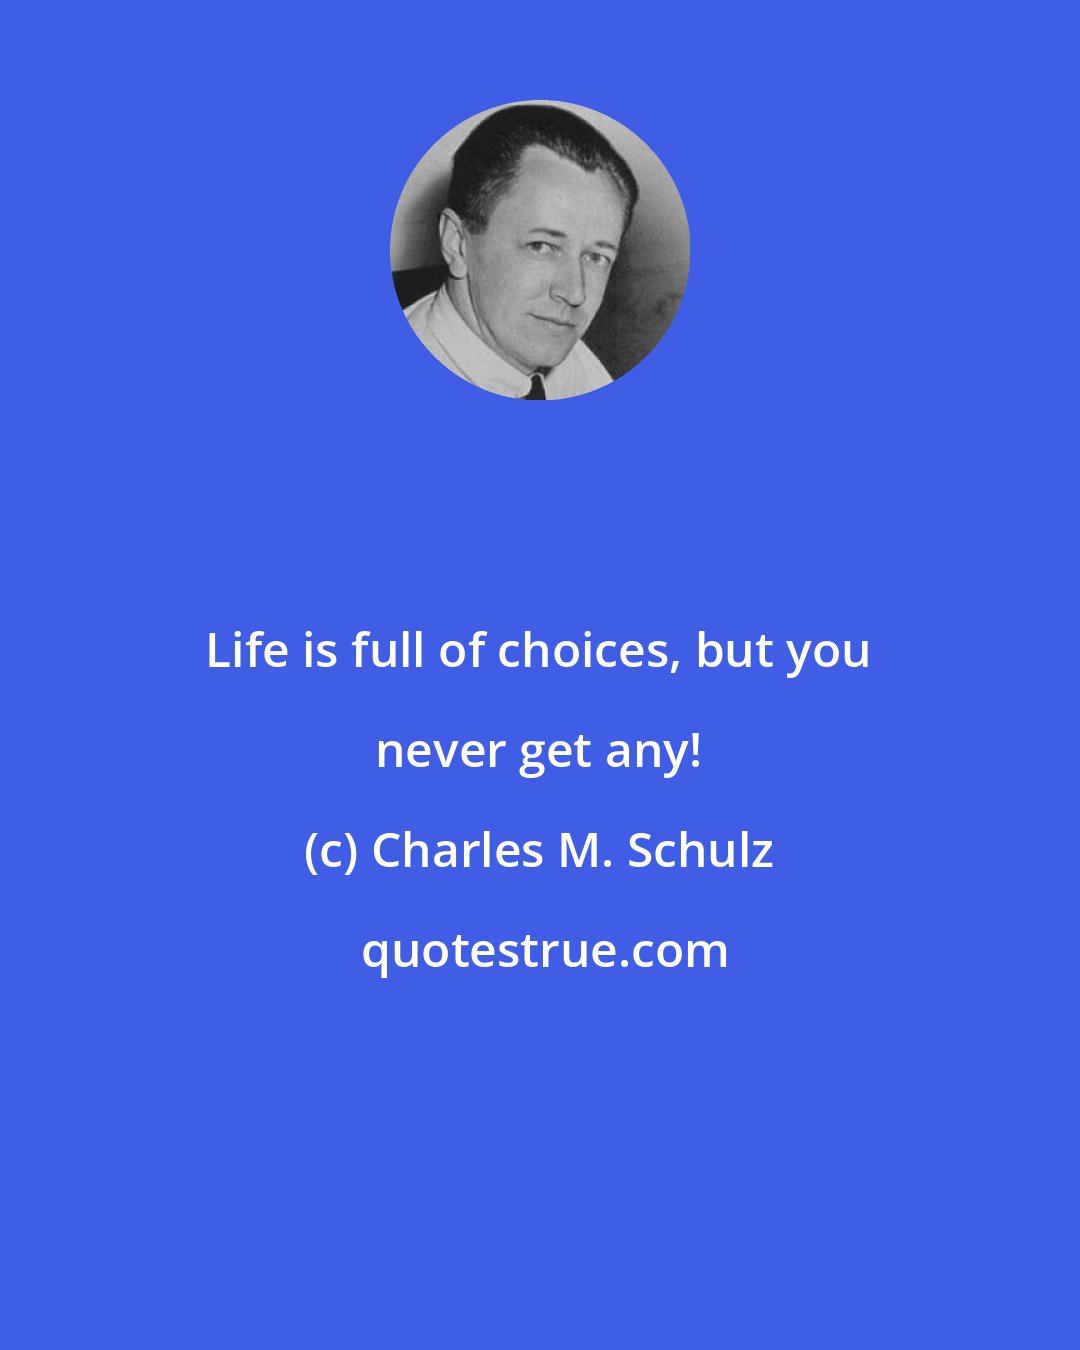 Charles M. Schulz: Life is full of choices, but you never get any!